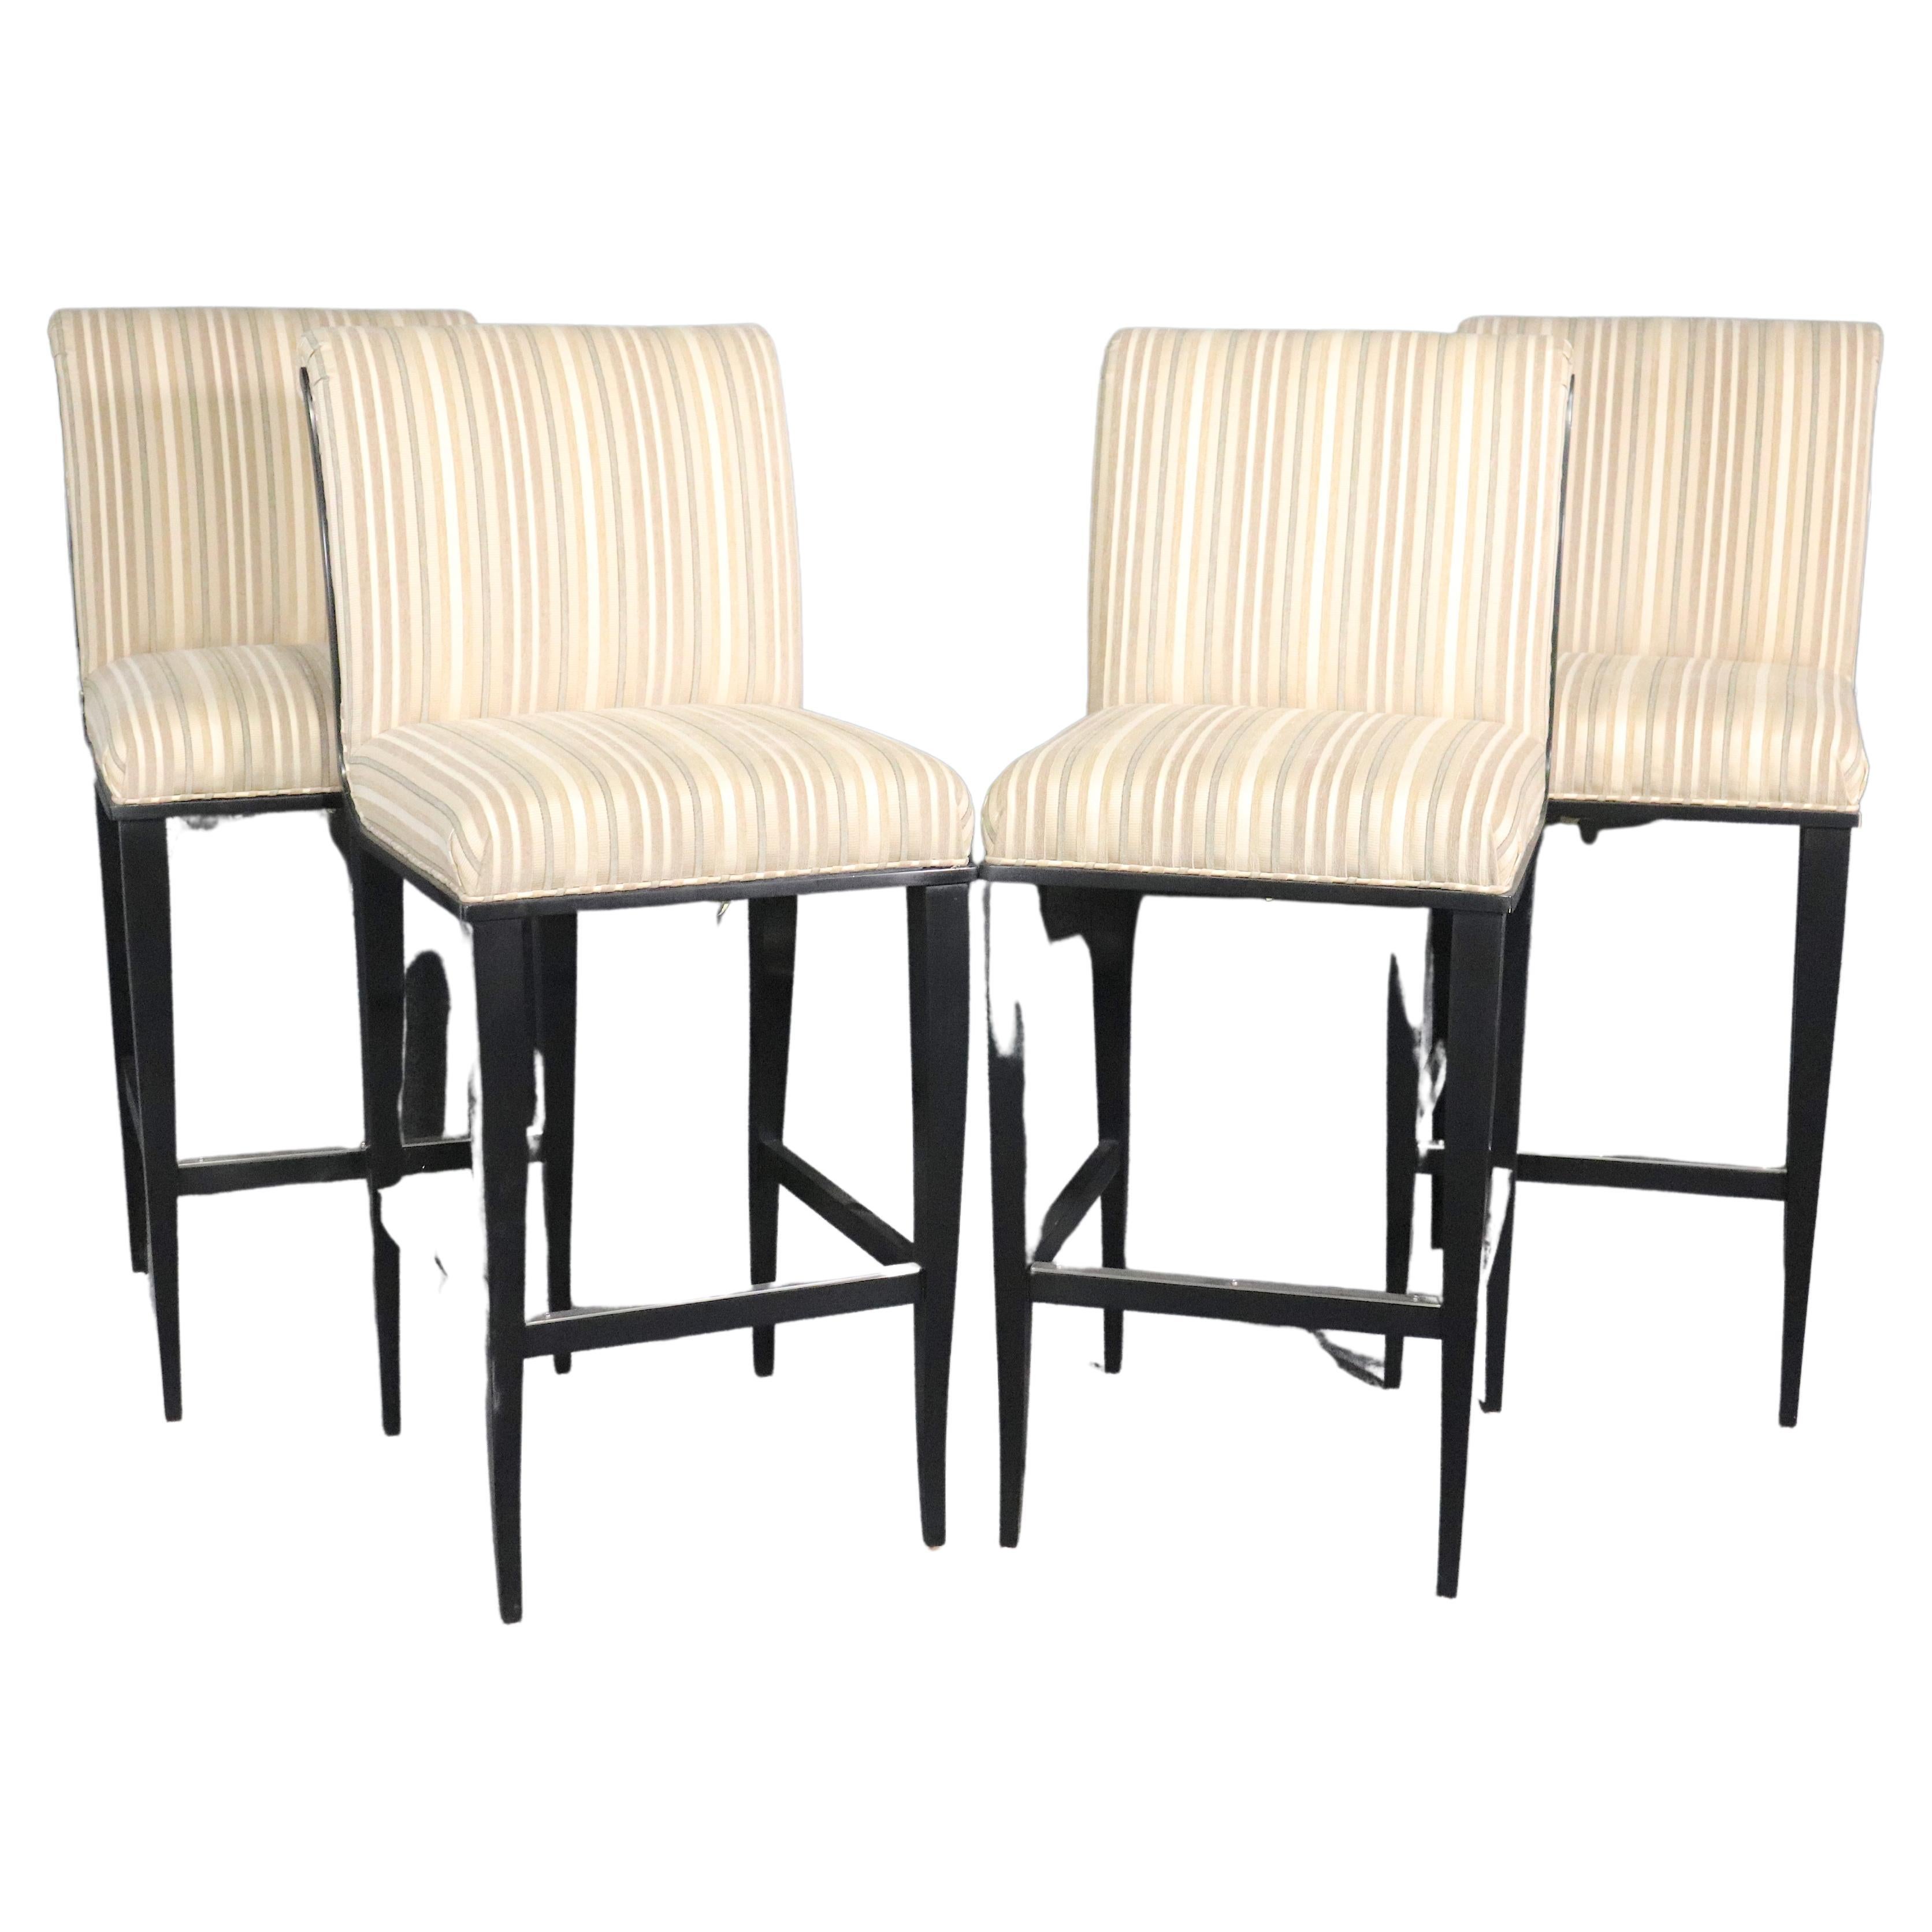 Four Modern Stools For Sale